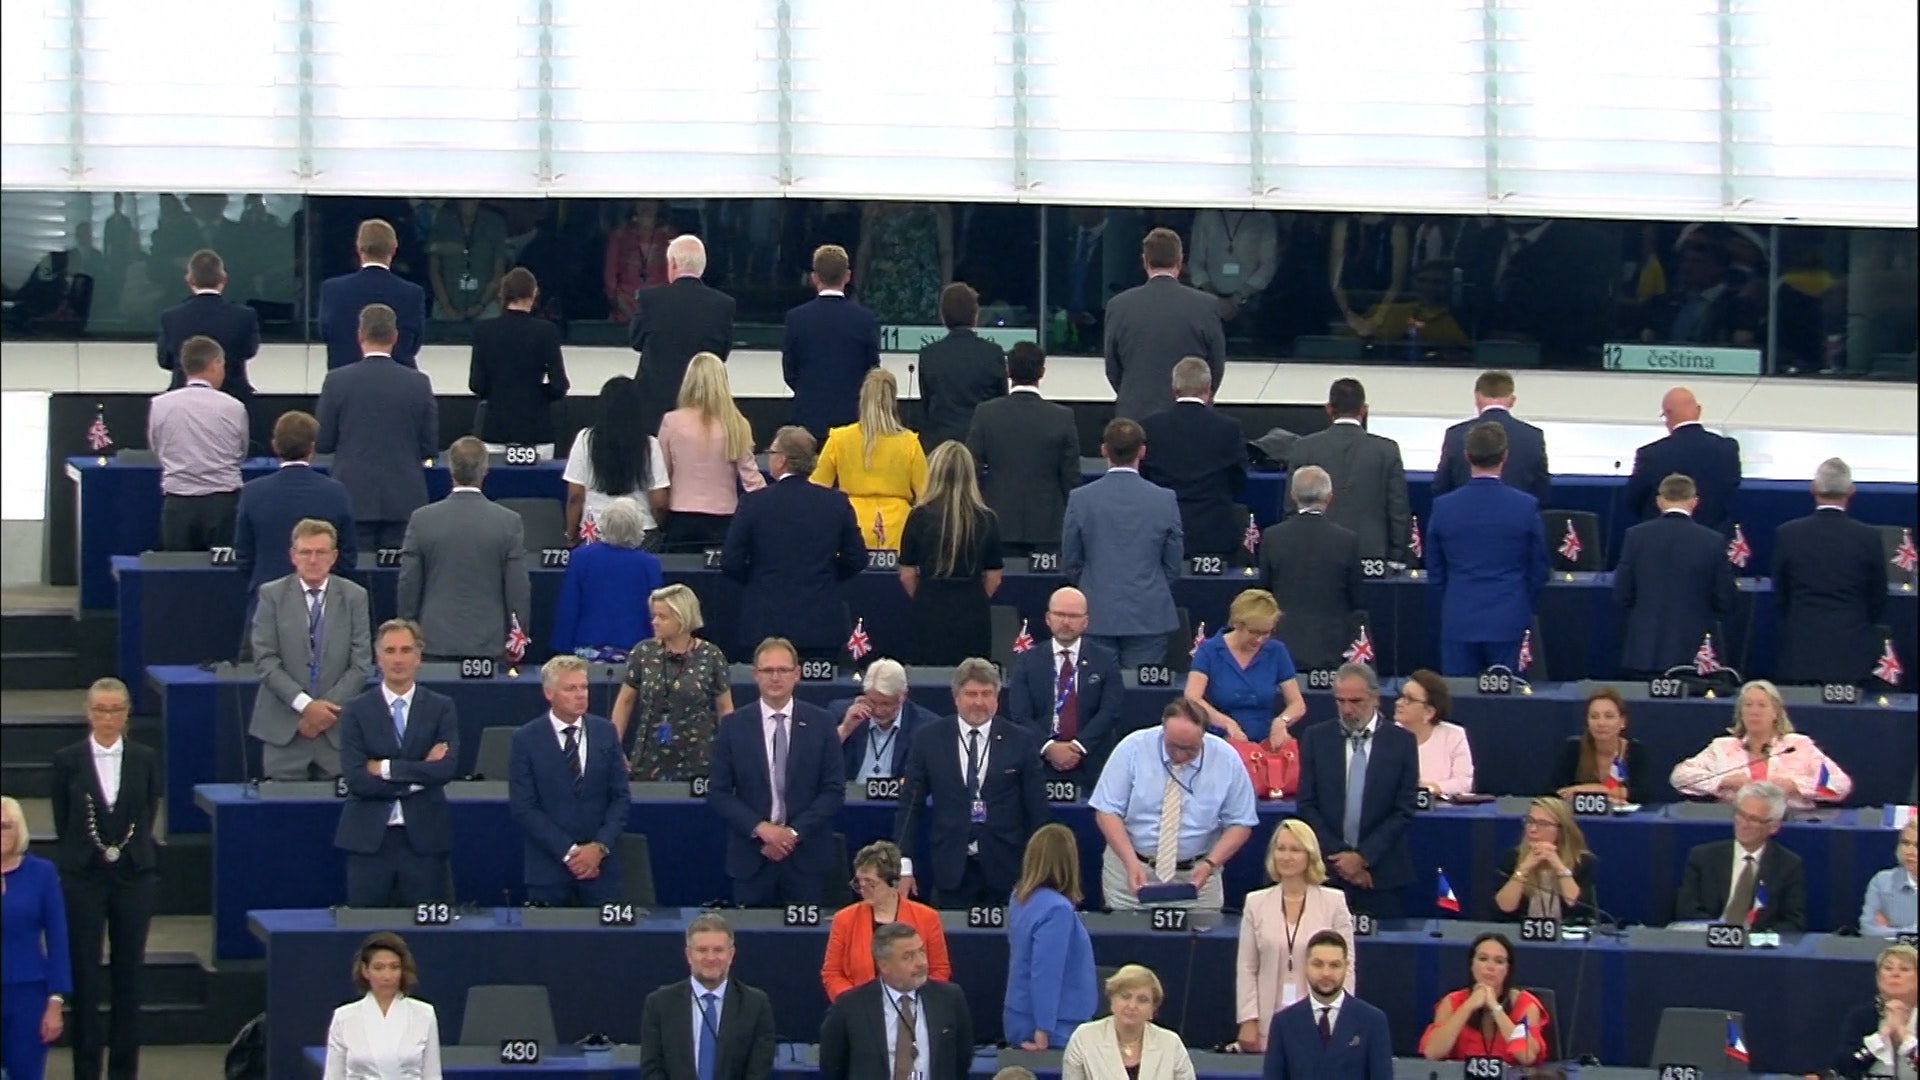 ‘I’m not showing respect to foreign anthems’ says Nigel Farage as Brexit Party MEPs insult EU anthem